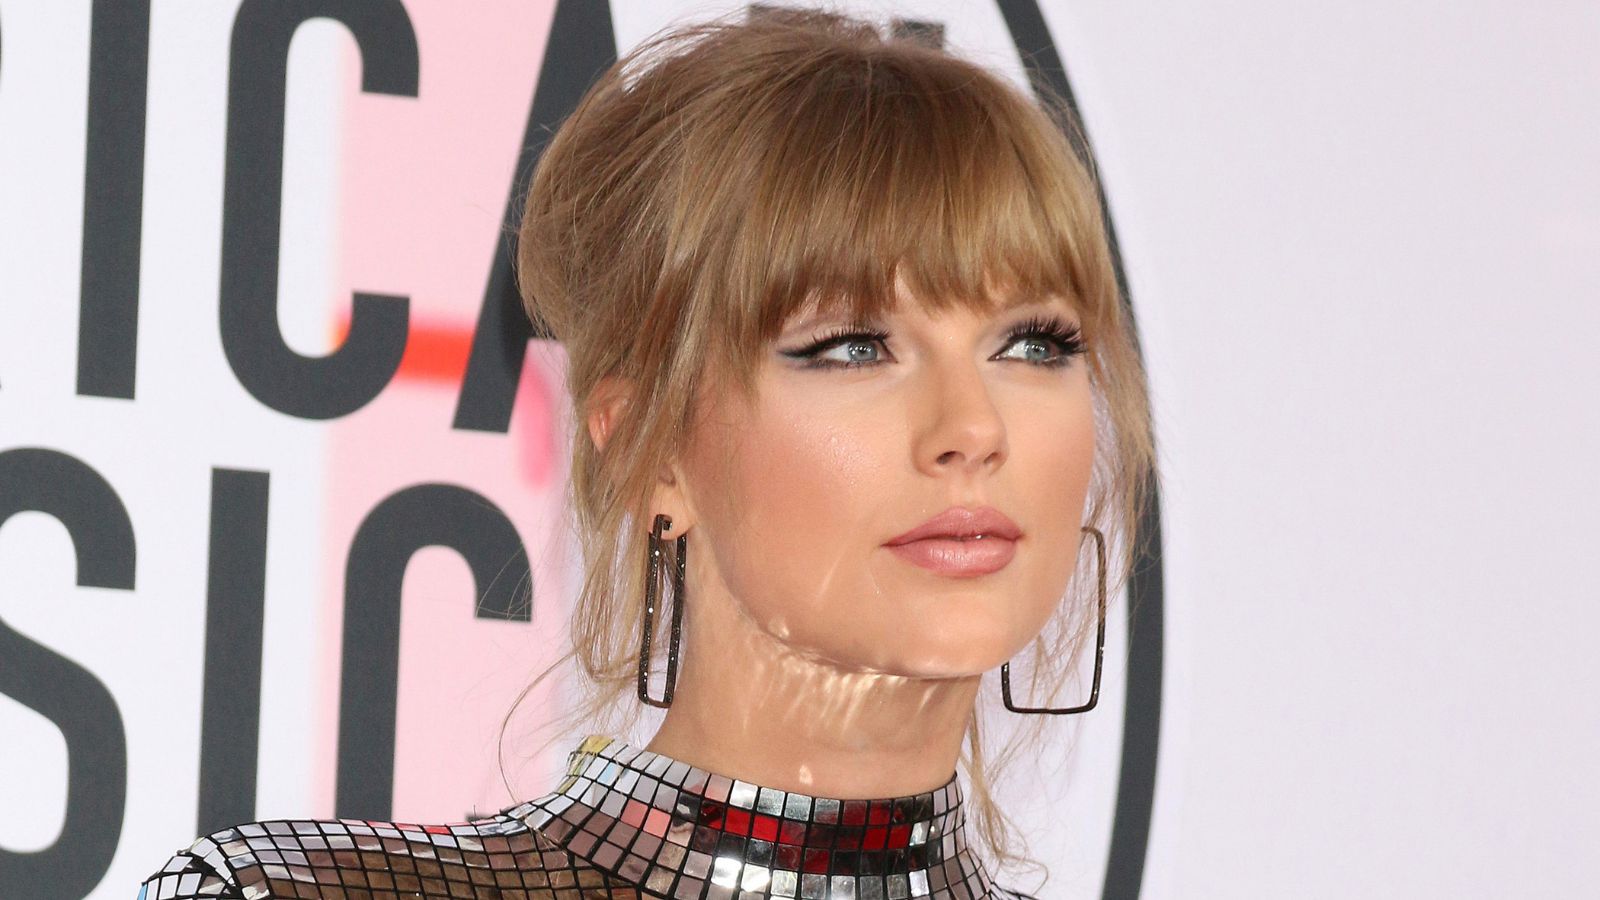 “We Are All Taylor Swift Fans”: Could Taylor Swift Run for President?